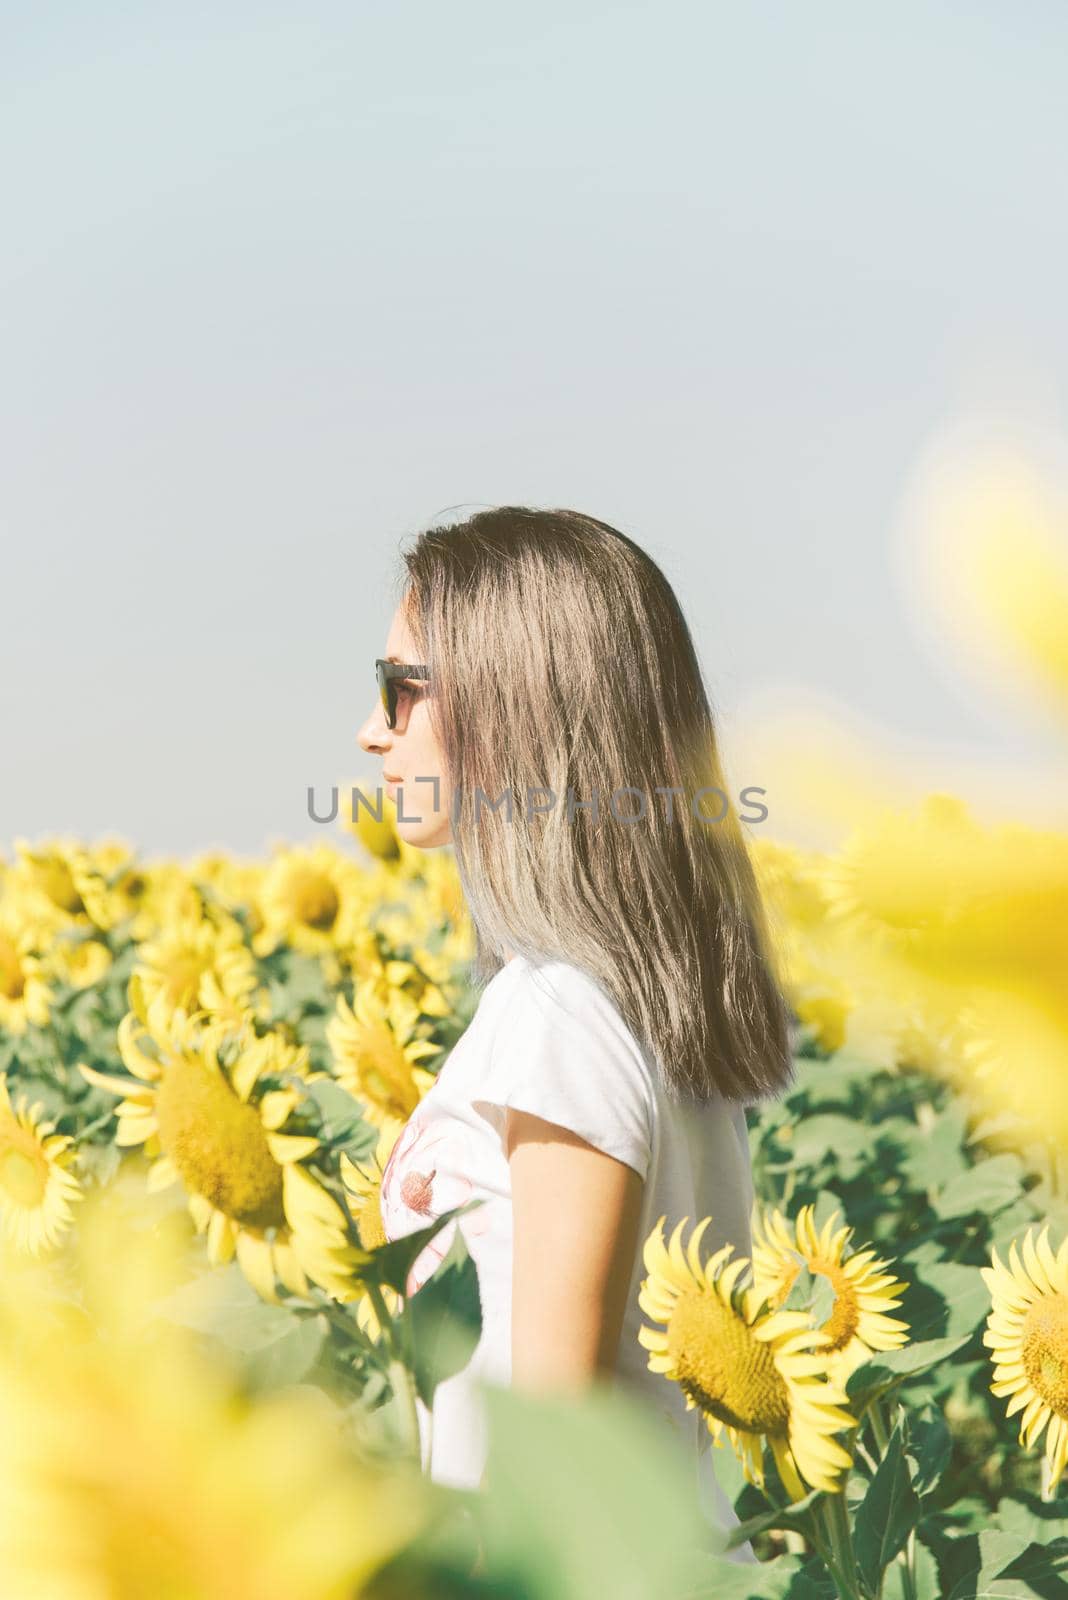 Beautiful woman standing in the field among yellow sunflowers.